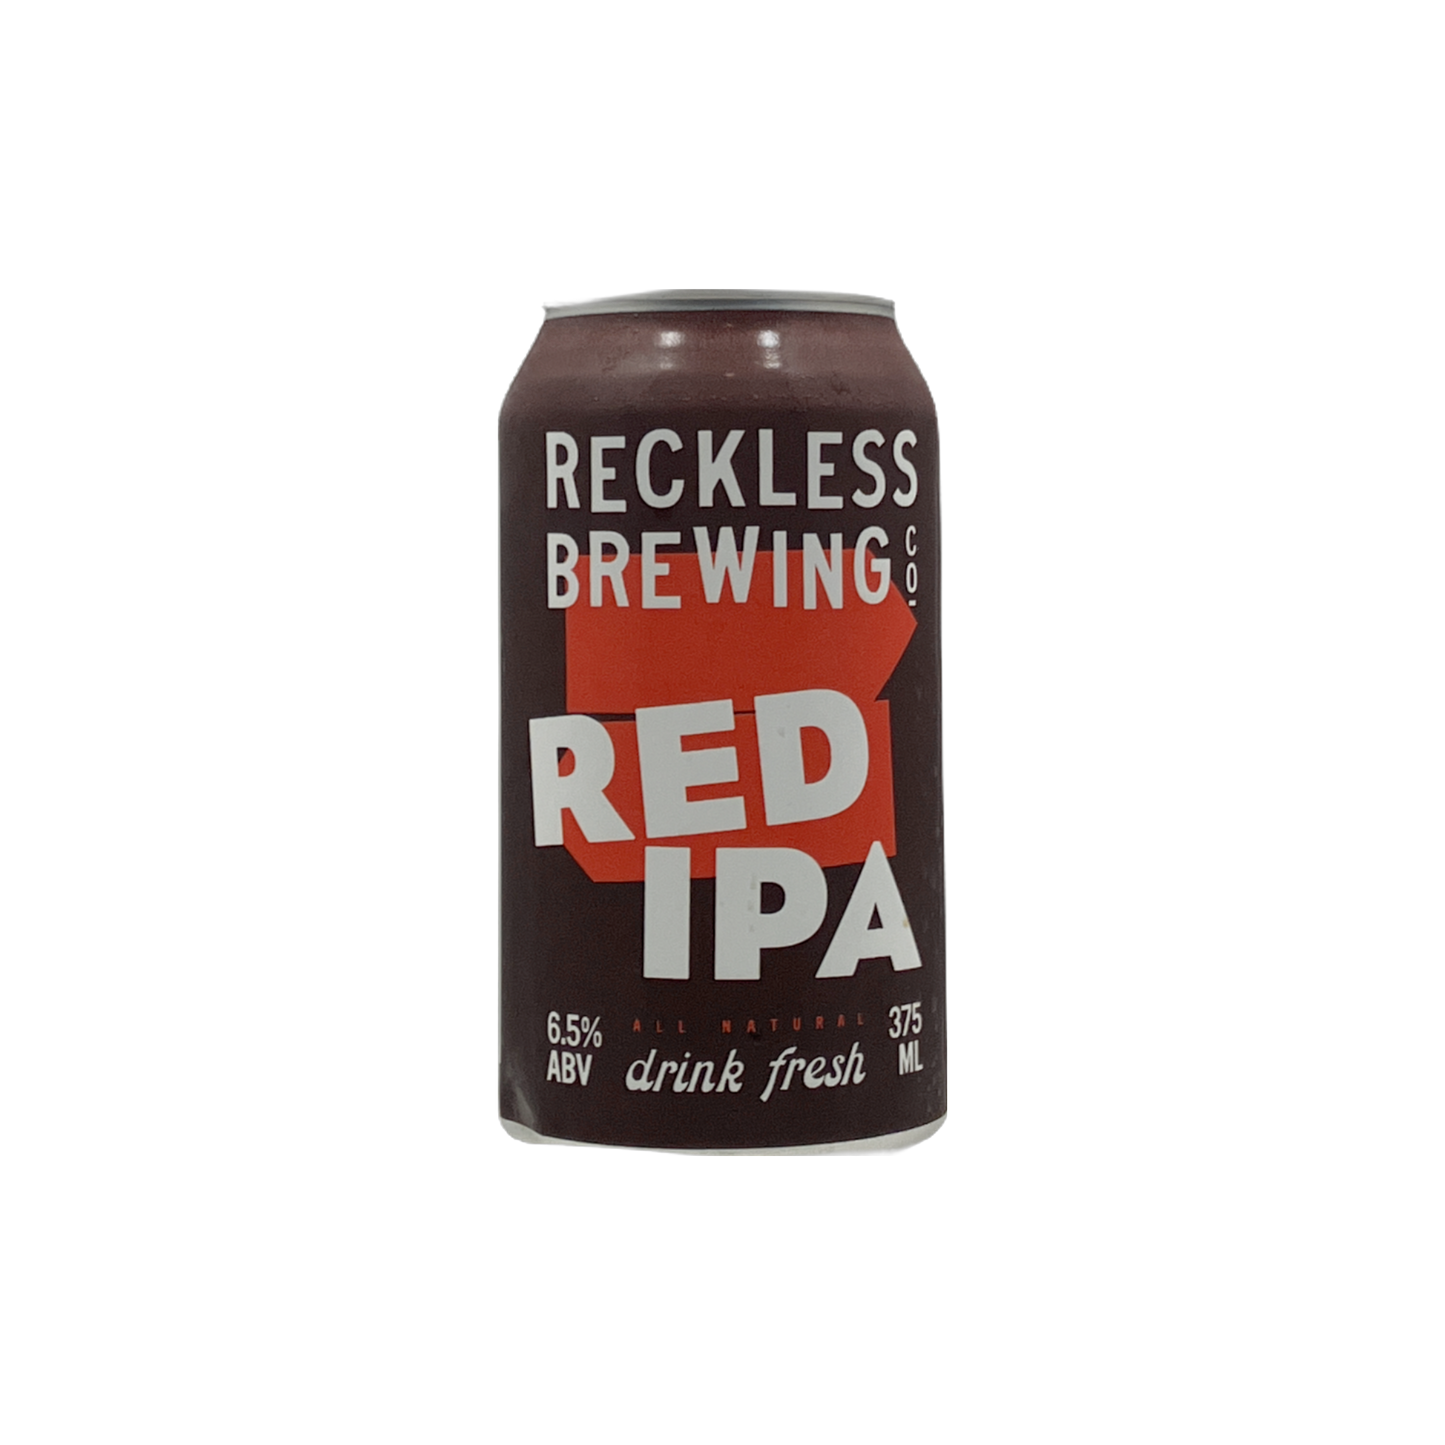 Reckless Brewing Red IPA 375ml